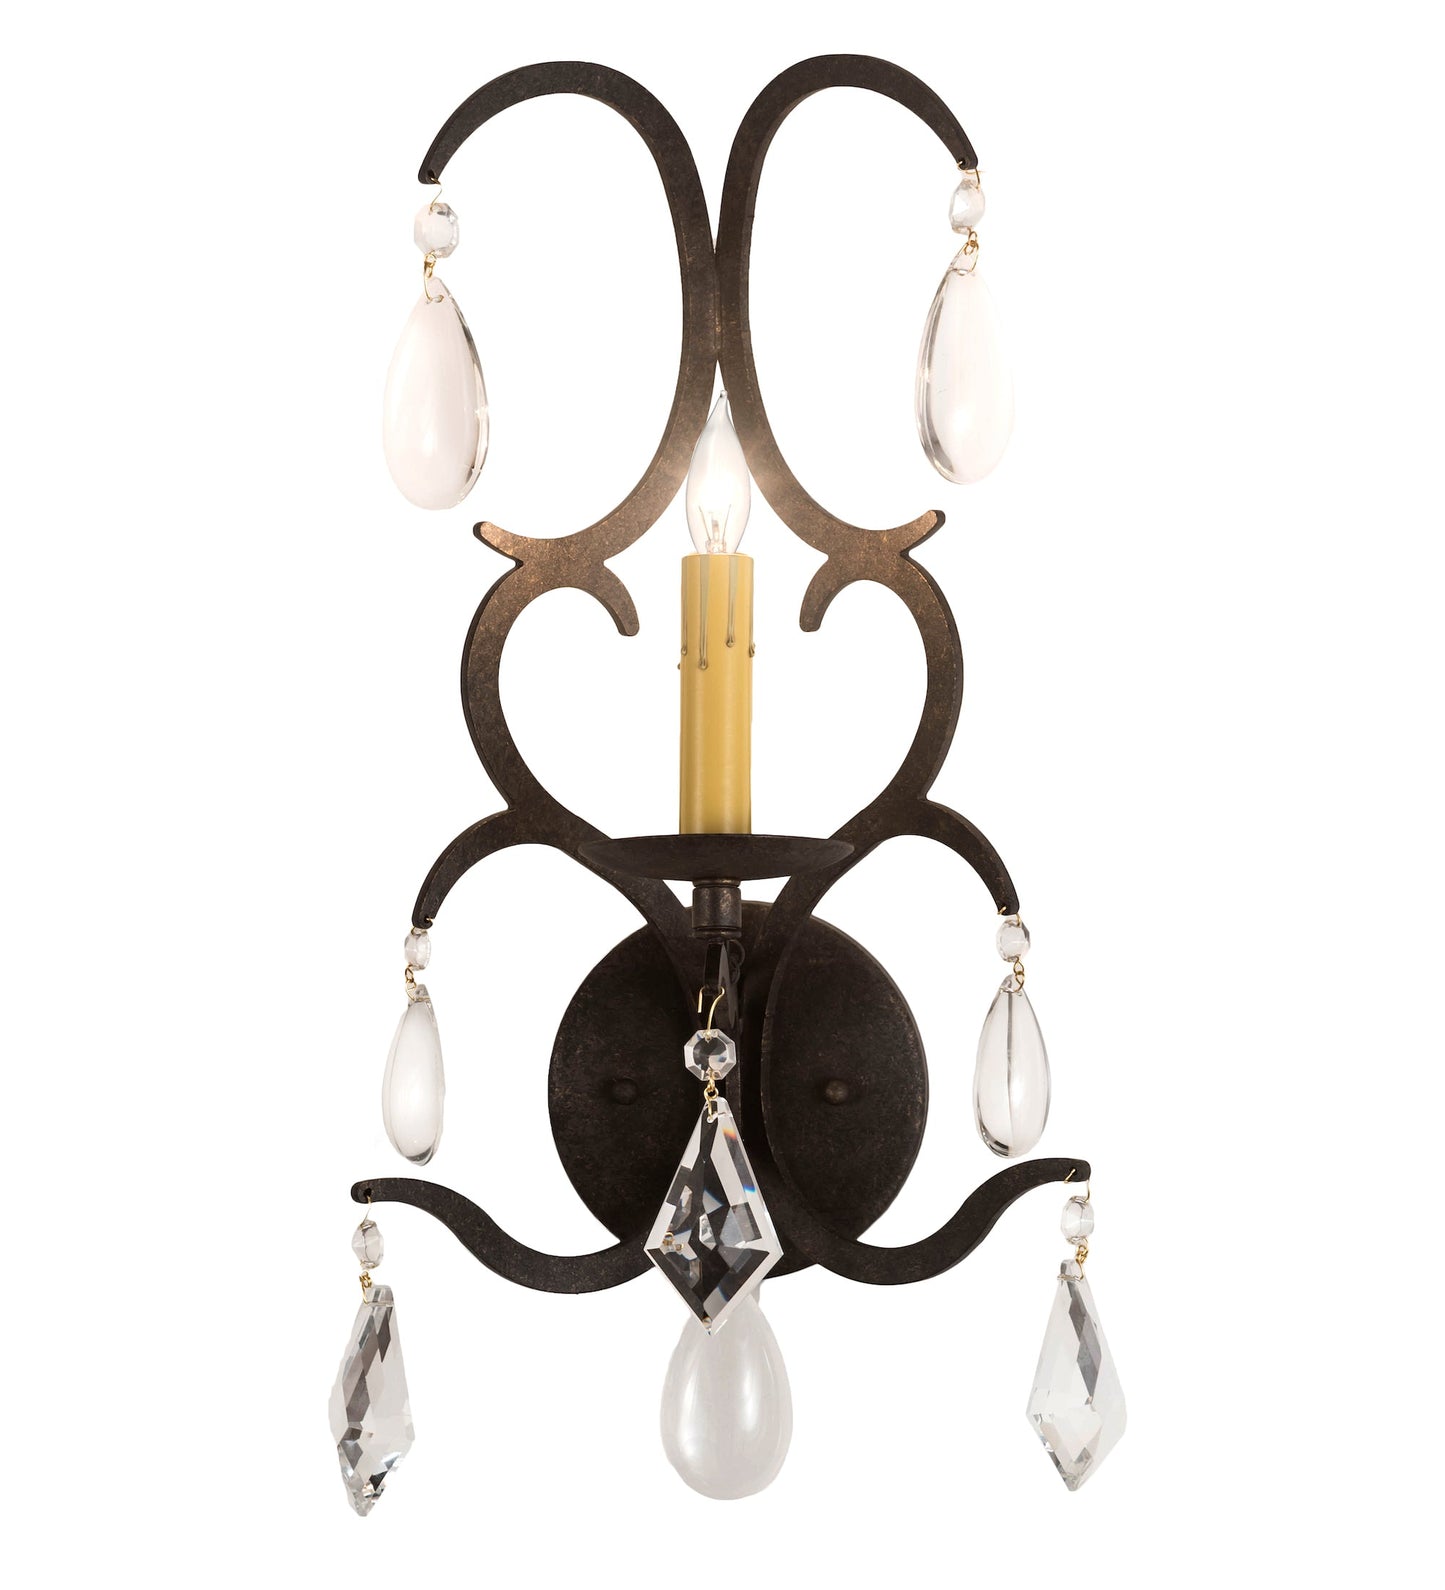 10" Alicia Wall Sconce by 2nd Ave Lighting